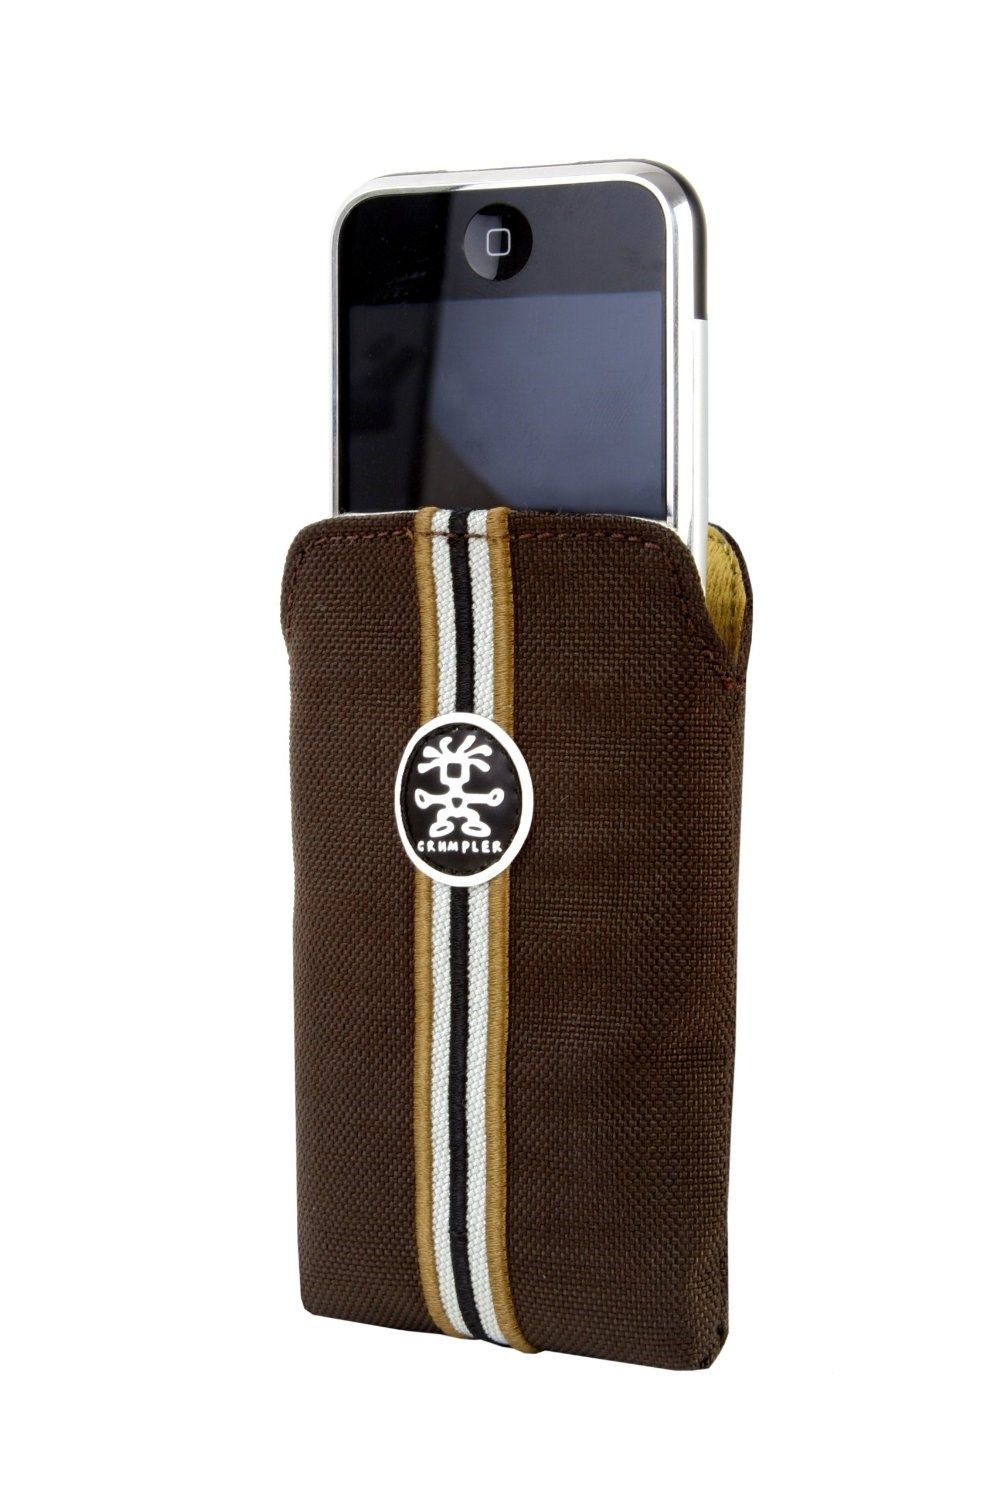 Crumpler The Culchie Pouch case for Apple iPhone 3, 4 & 4S - iPod Touch espresso Brown